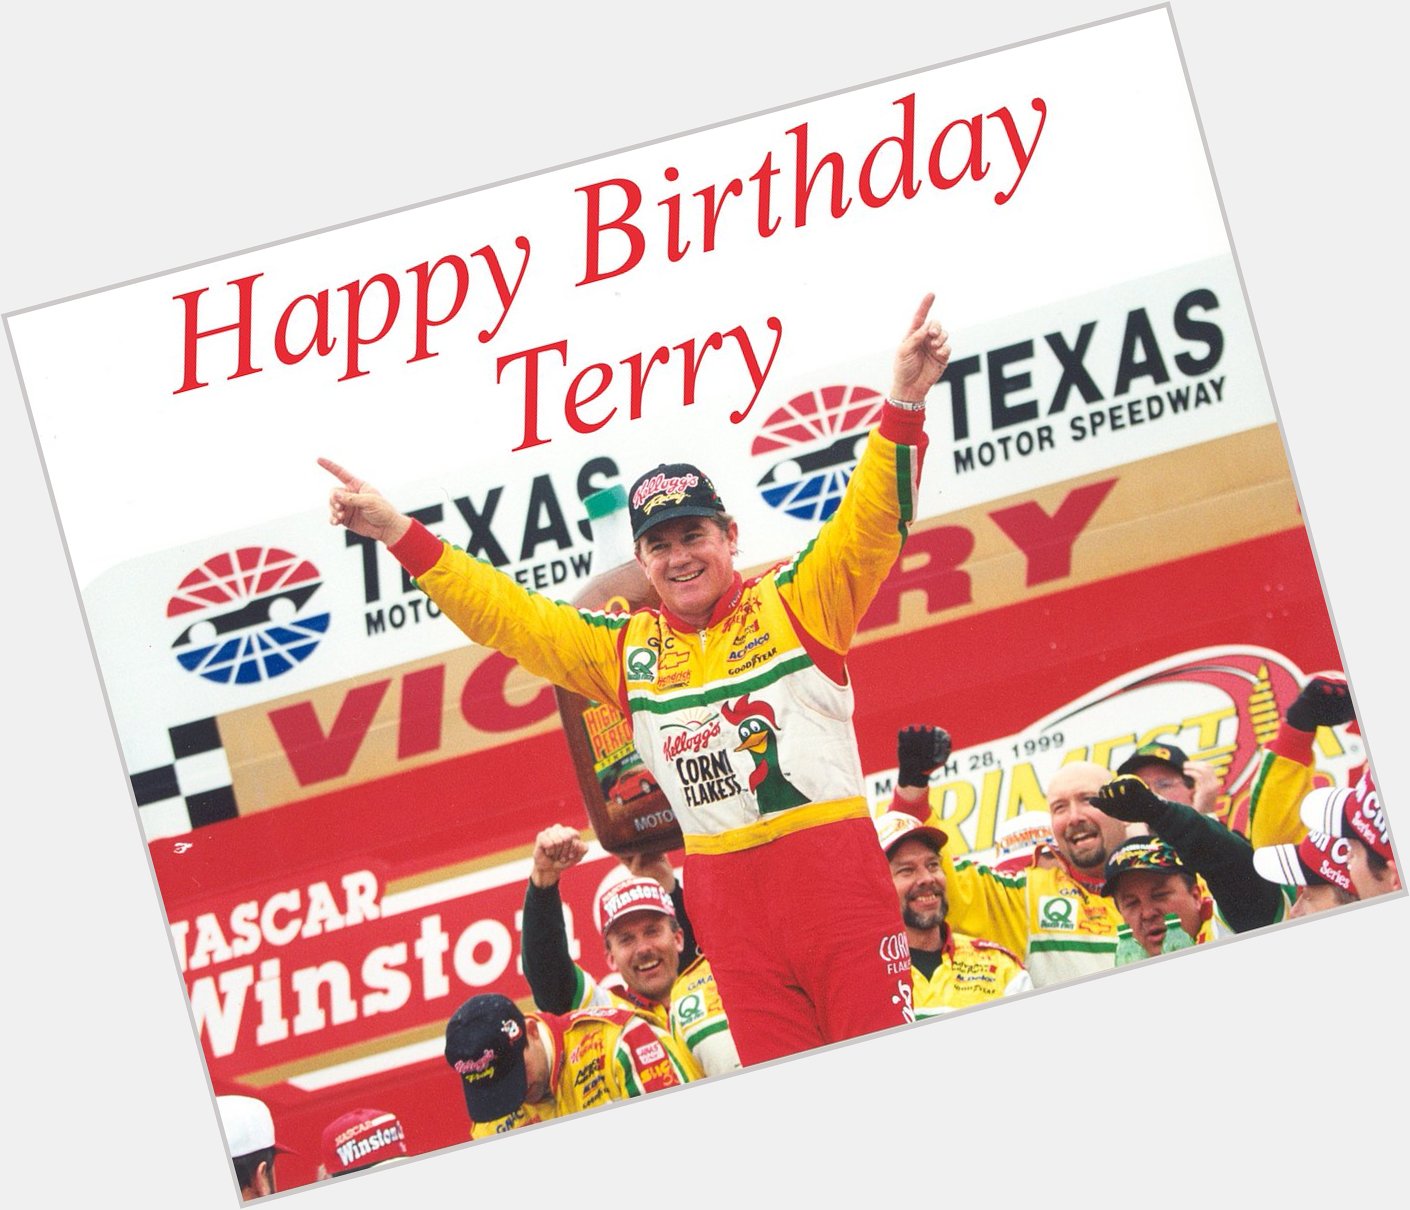 Happy Birthday to Terry from all of us here at Terry Labonte Chevrolet. 